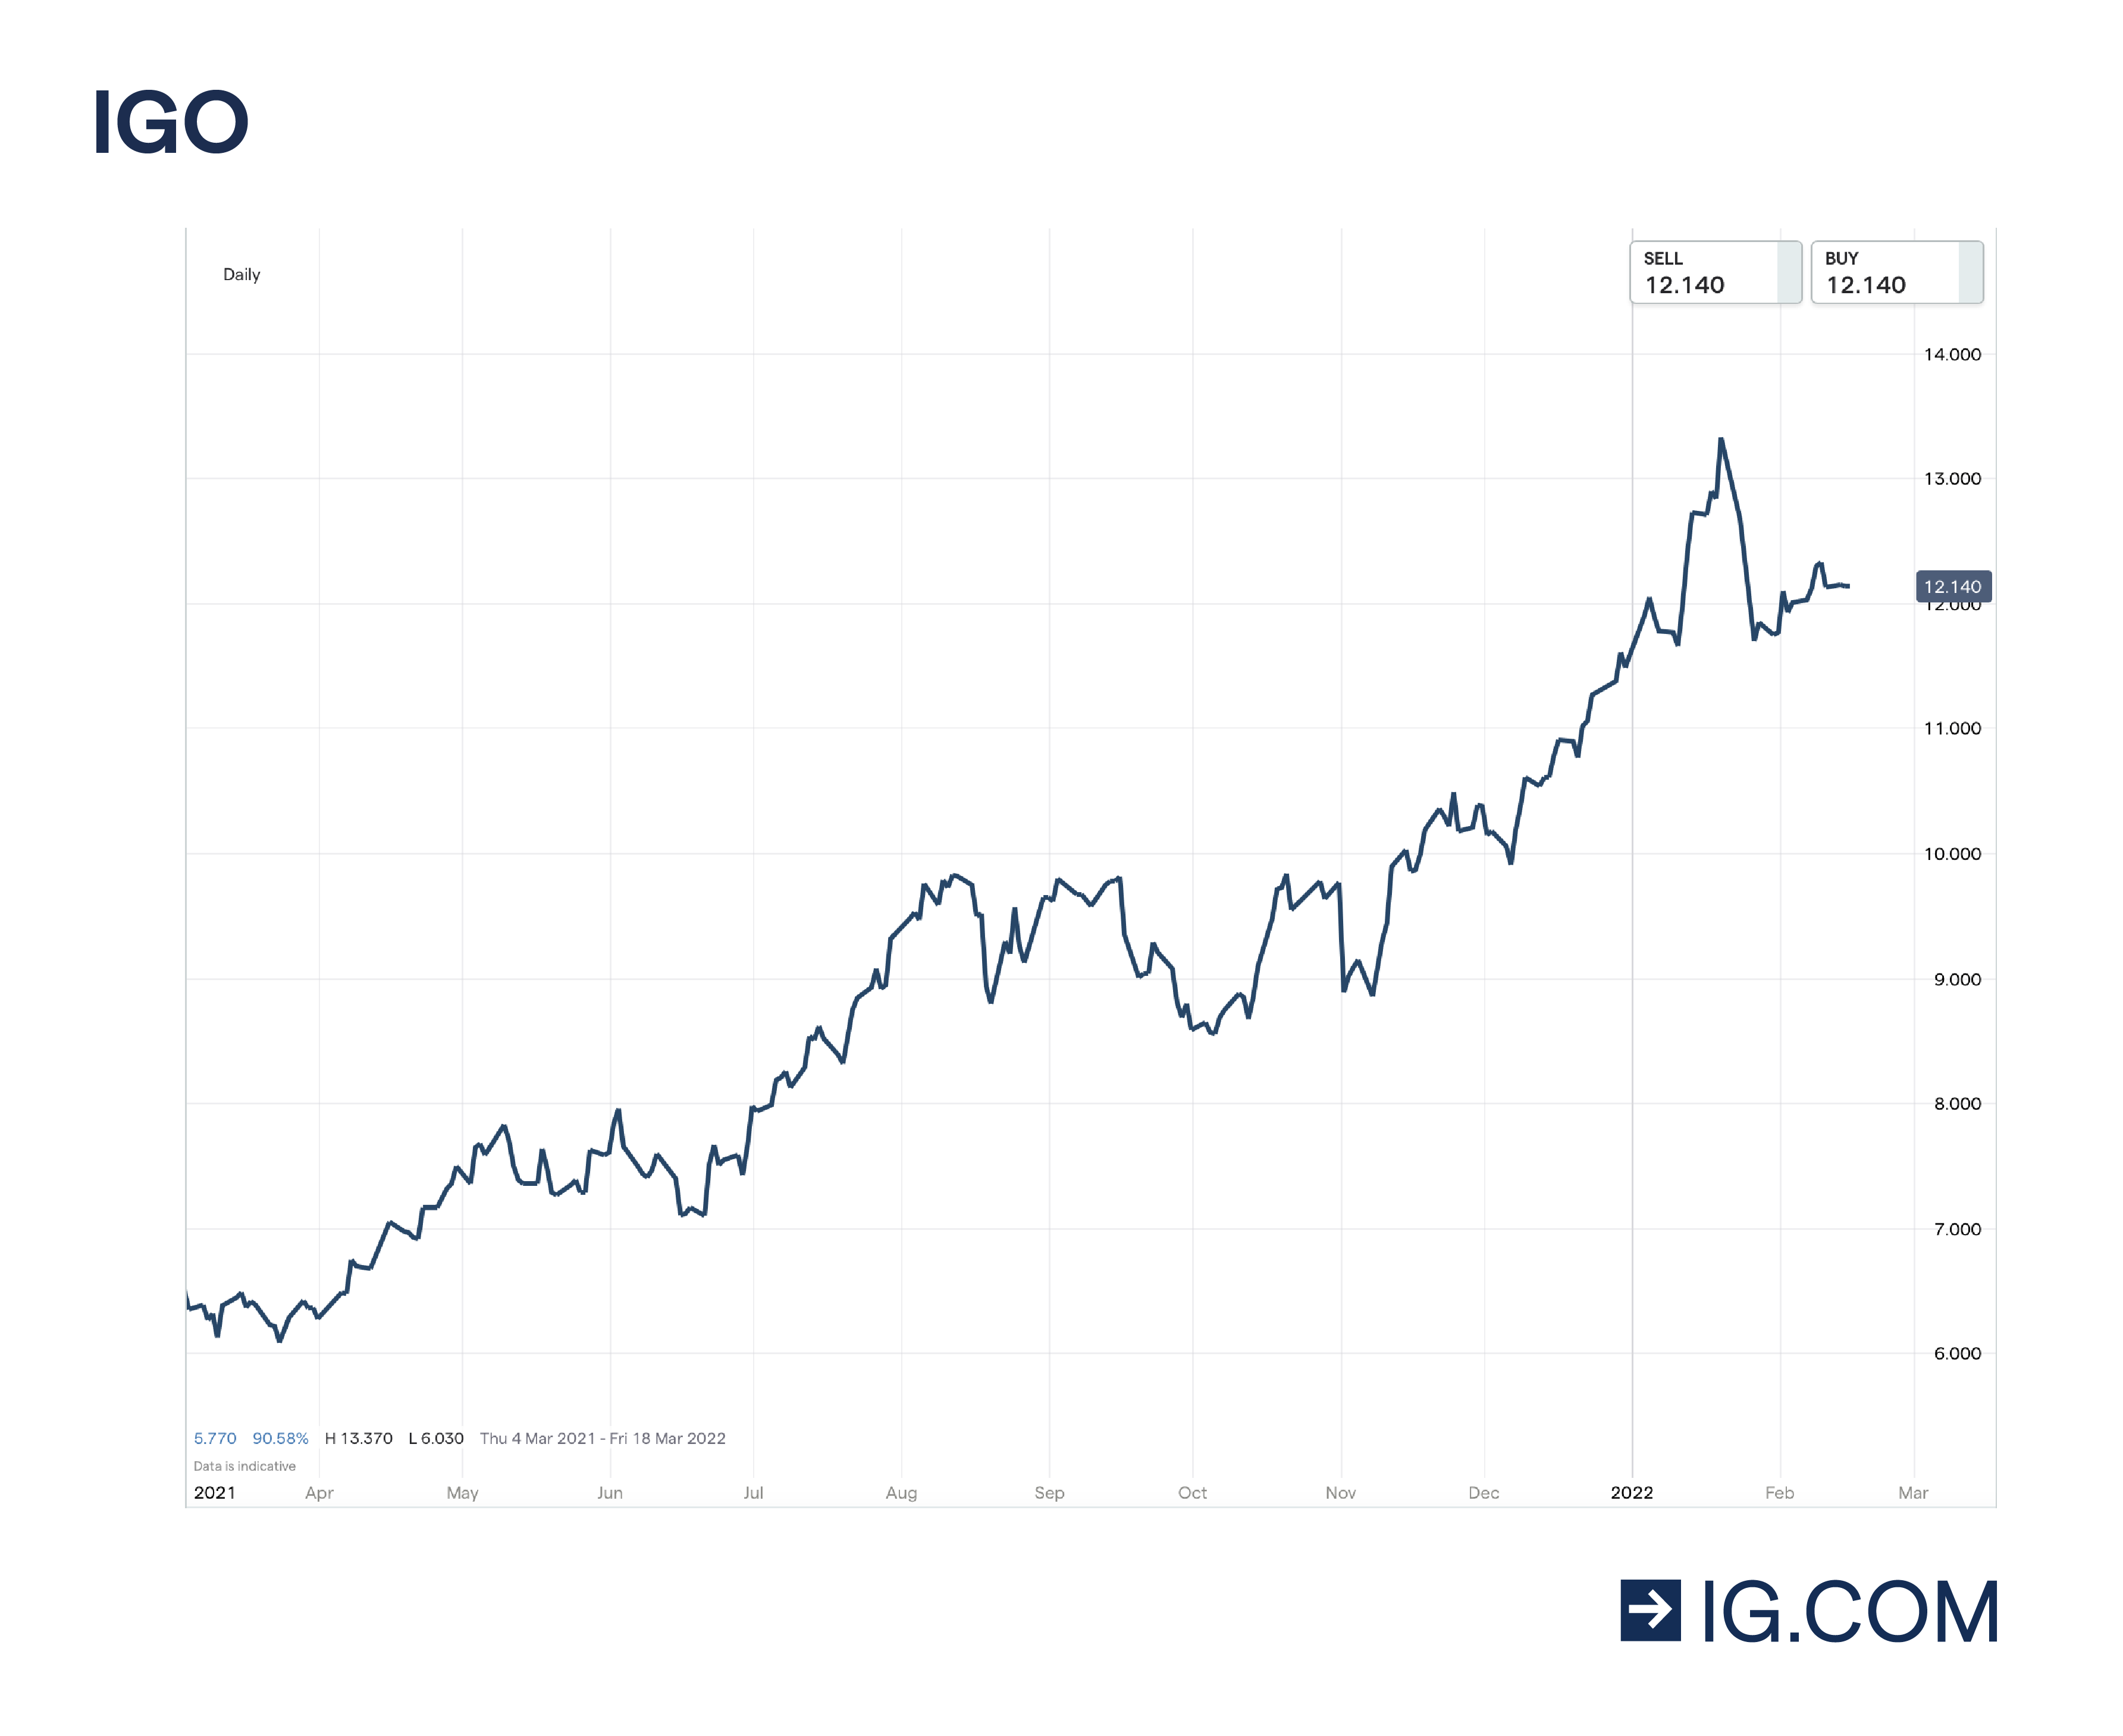 IGO stock chart showing different points in a 1 year timeline of the share price